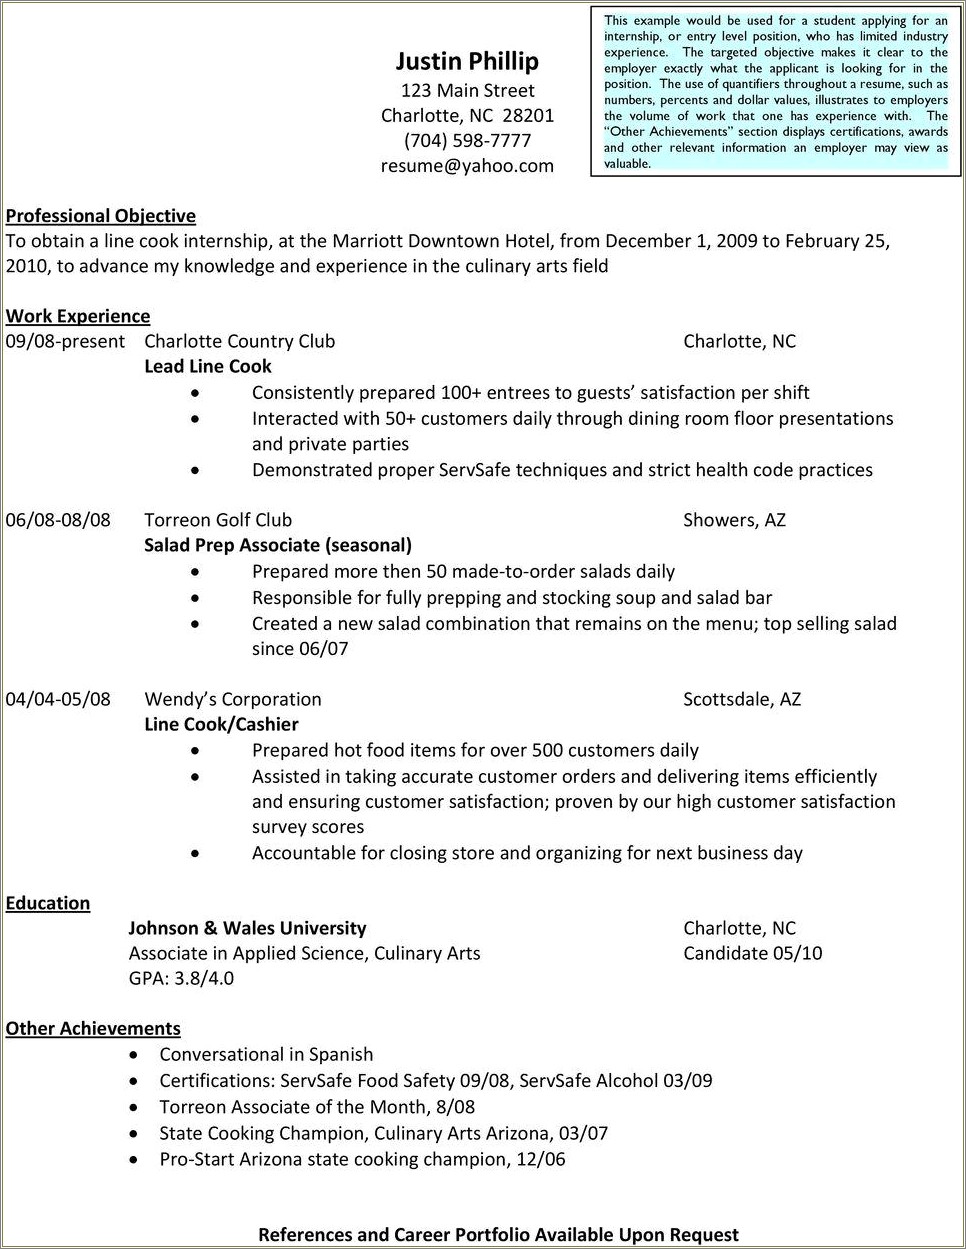 Objective For Internship Resume In Culinary Arts